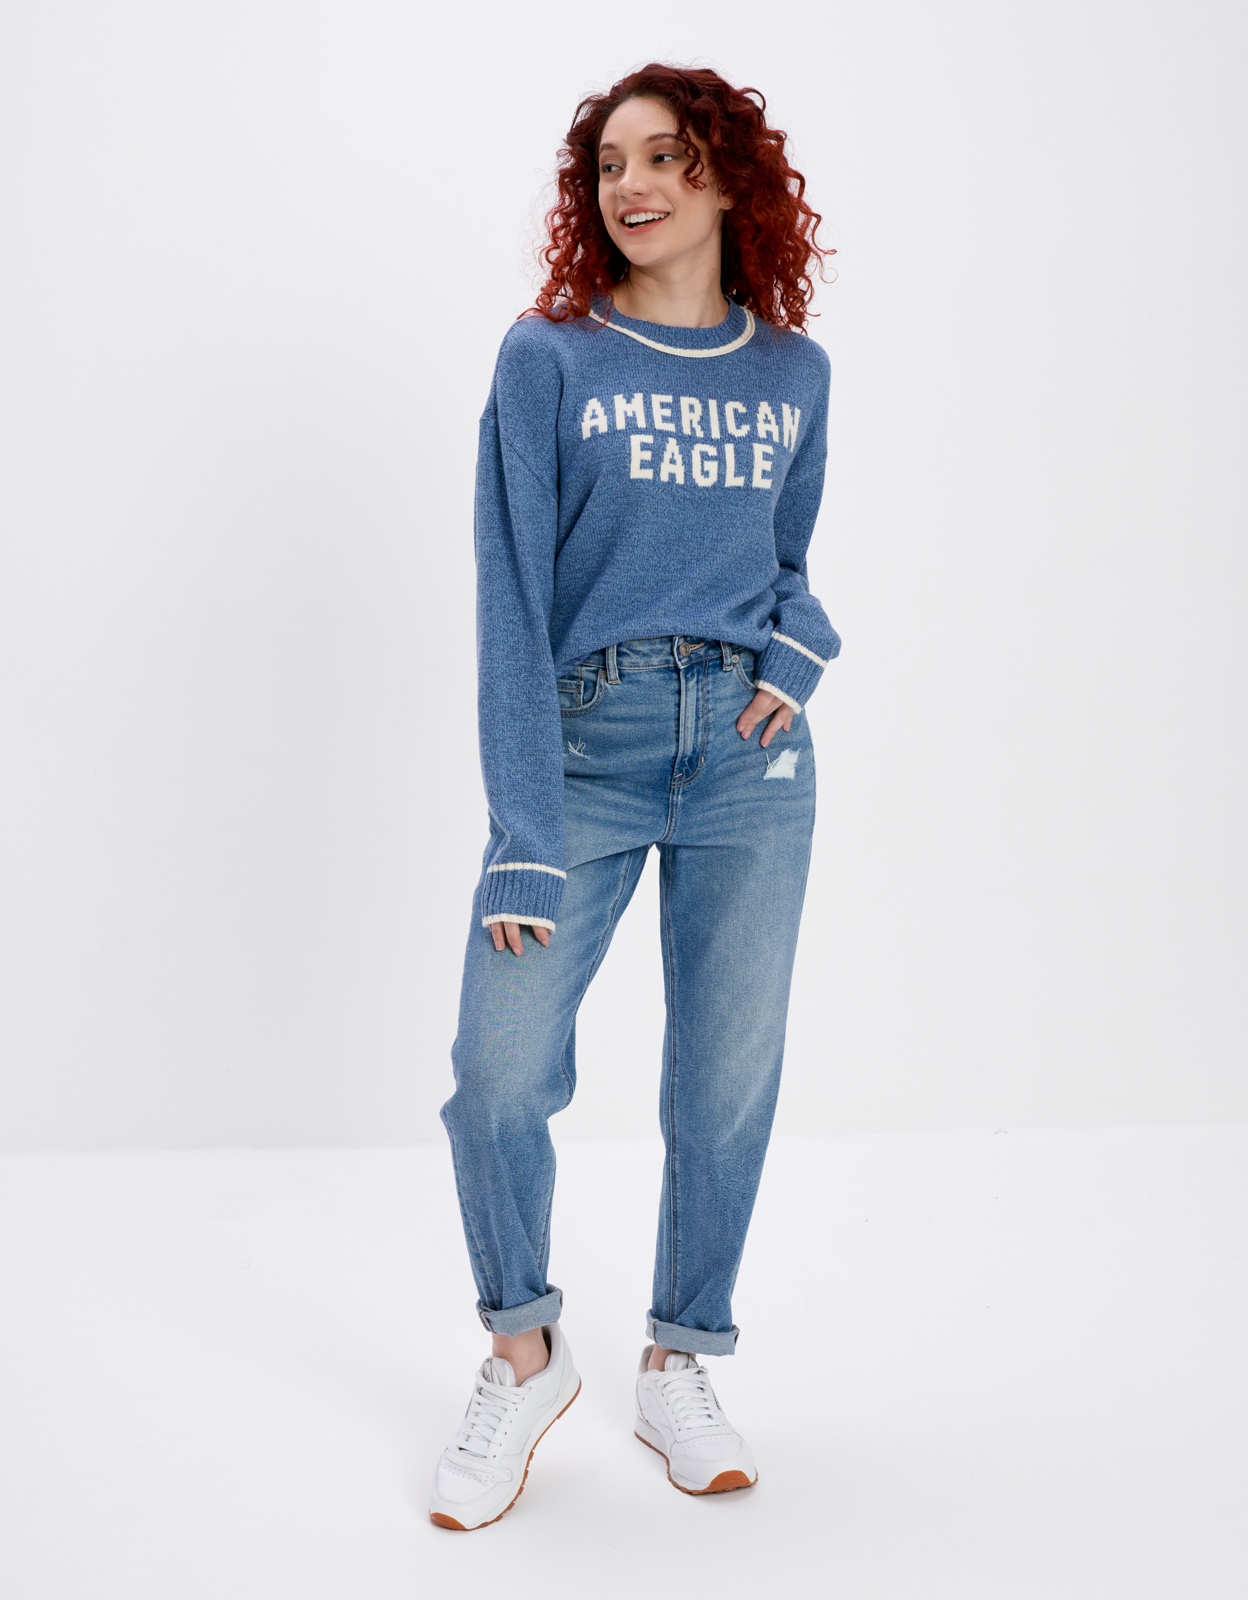 Shop AE Legging online  American Eagle Outfitters Egypt